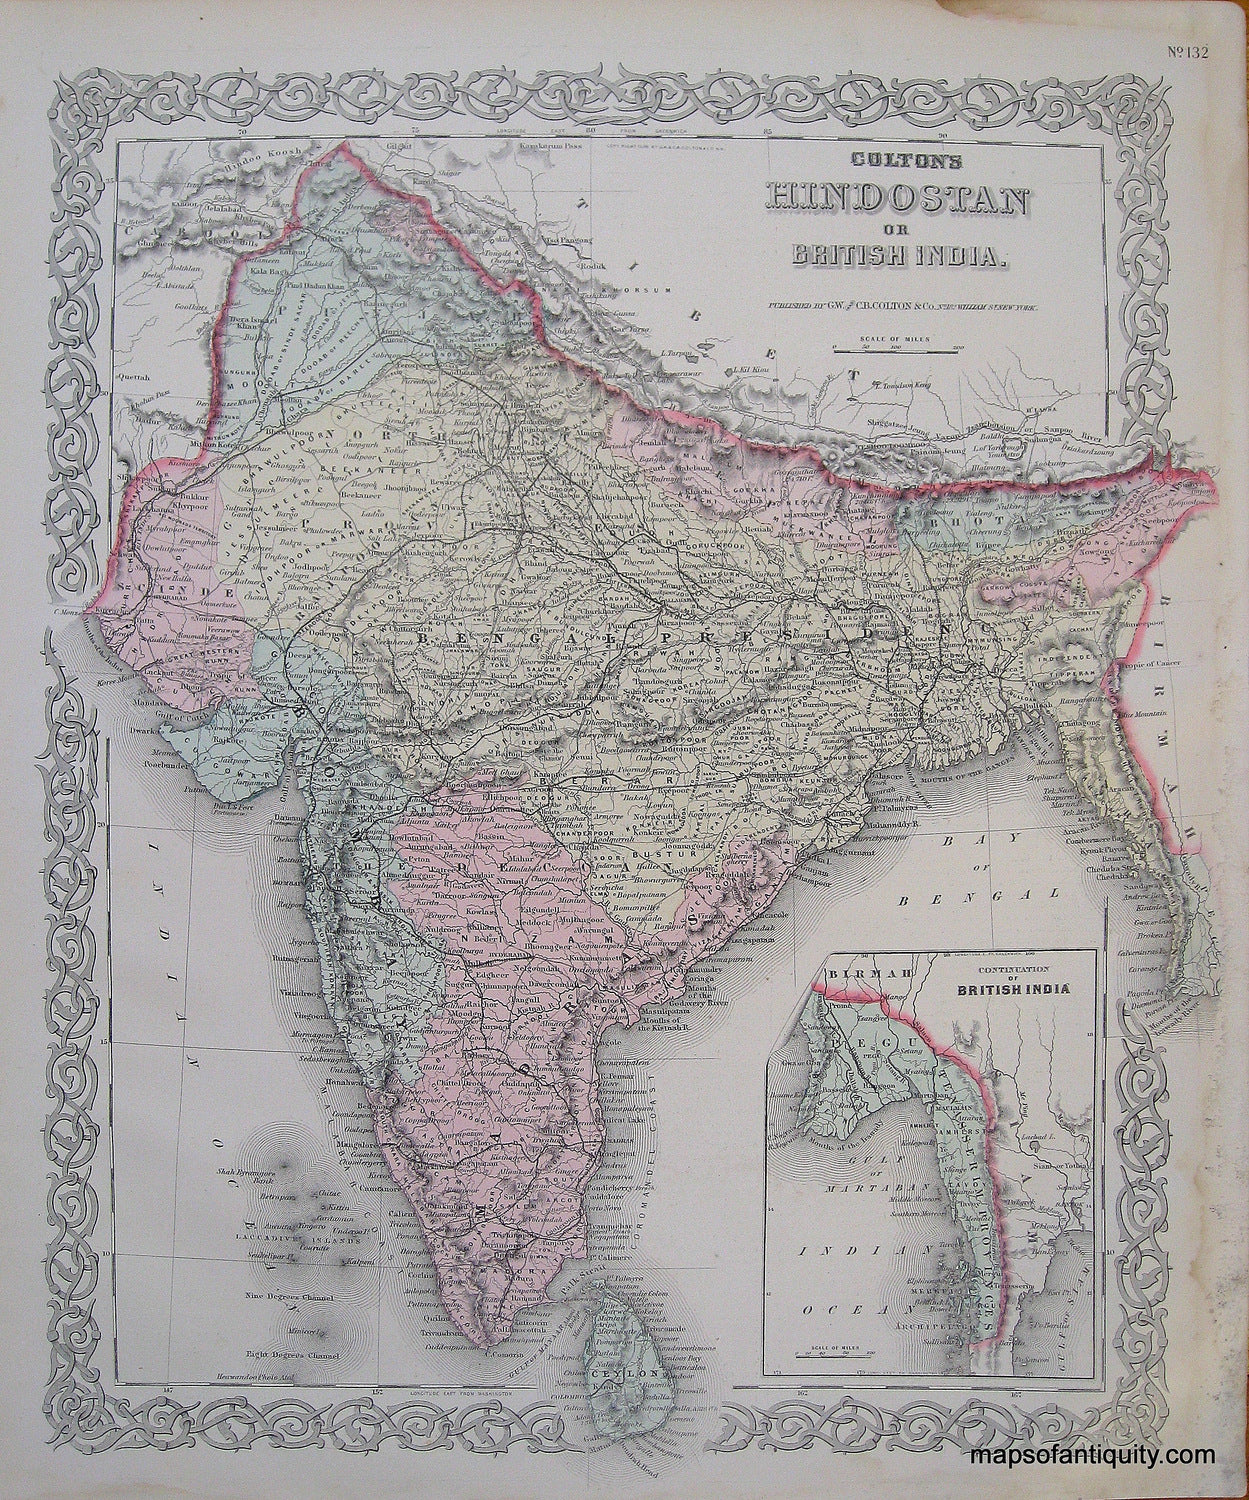 Antique-Hand-Colored-Map-Colton's-Hindostan-or-British-India.-**********-Asia-India-1887-Colton-Maps-Of-Antiquity